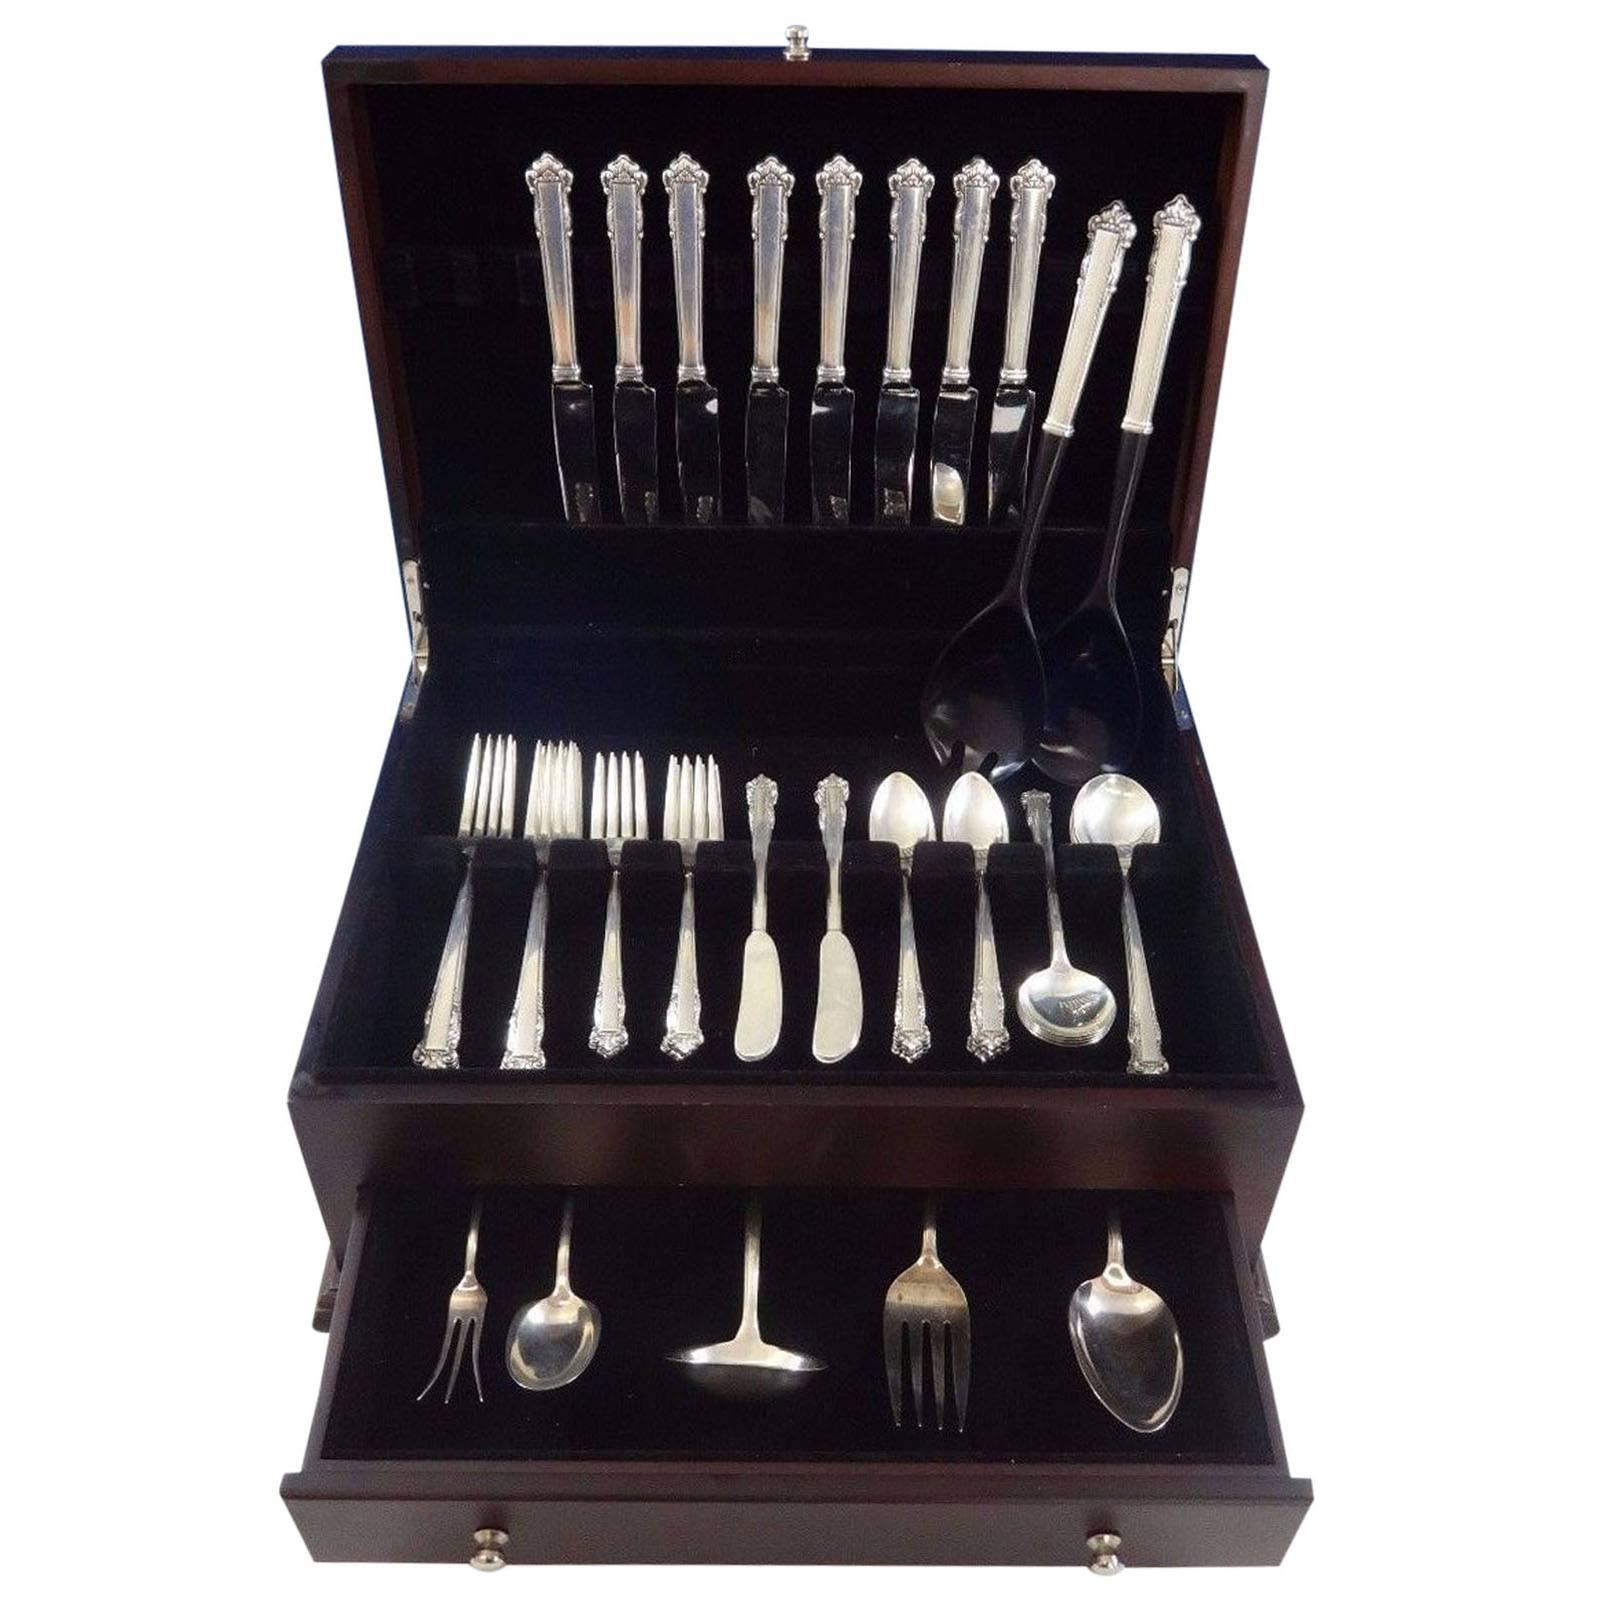 Beautiful English shell by Lunt sterling silver flatware set of 55 pieces. This set includes:

Eight knives, 8 7/8